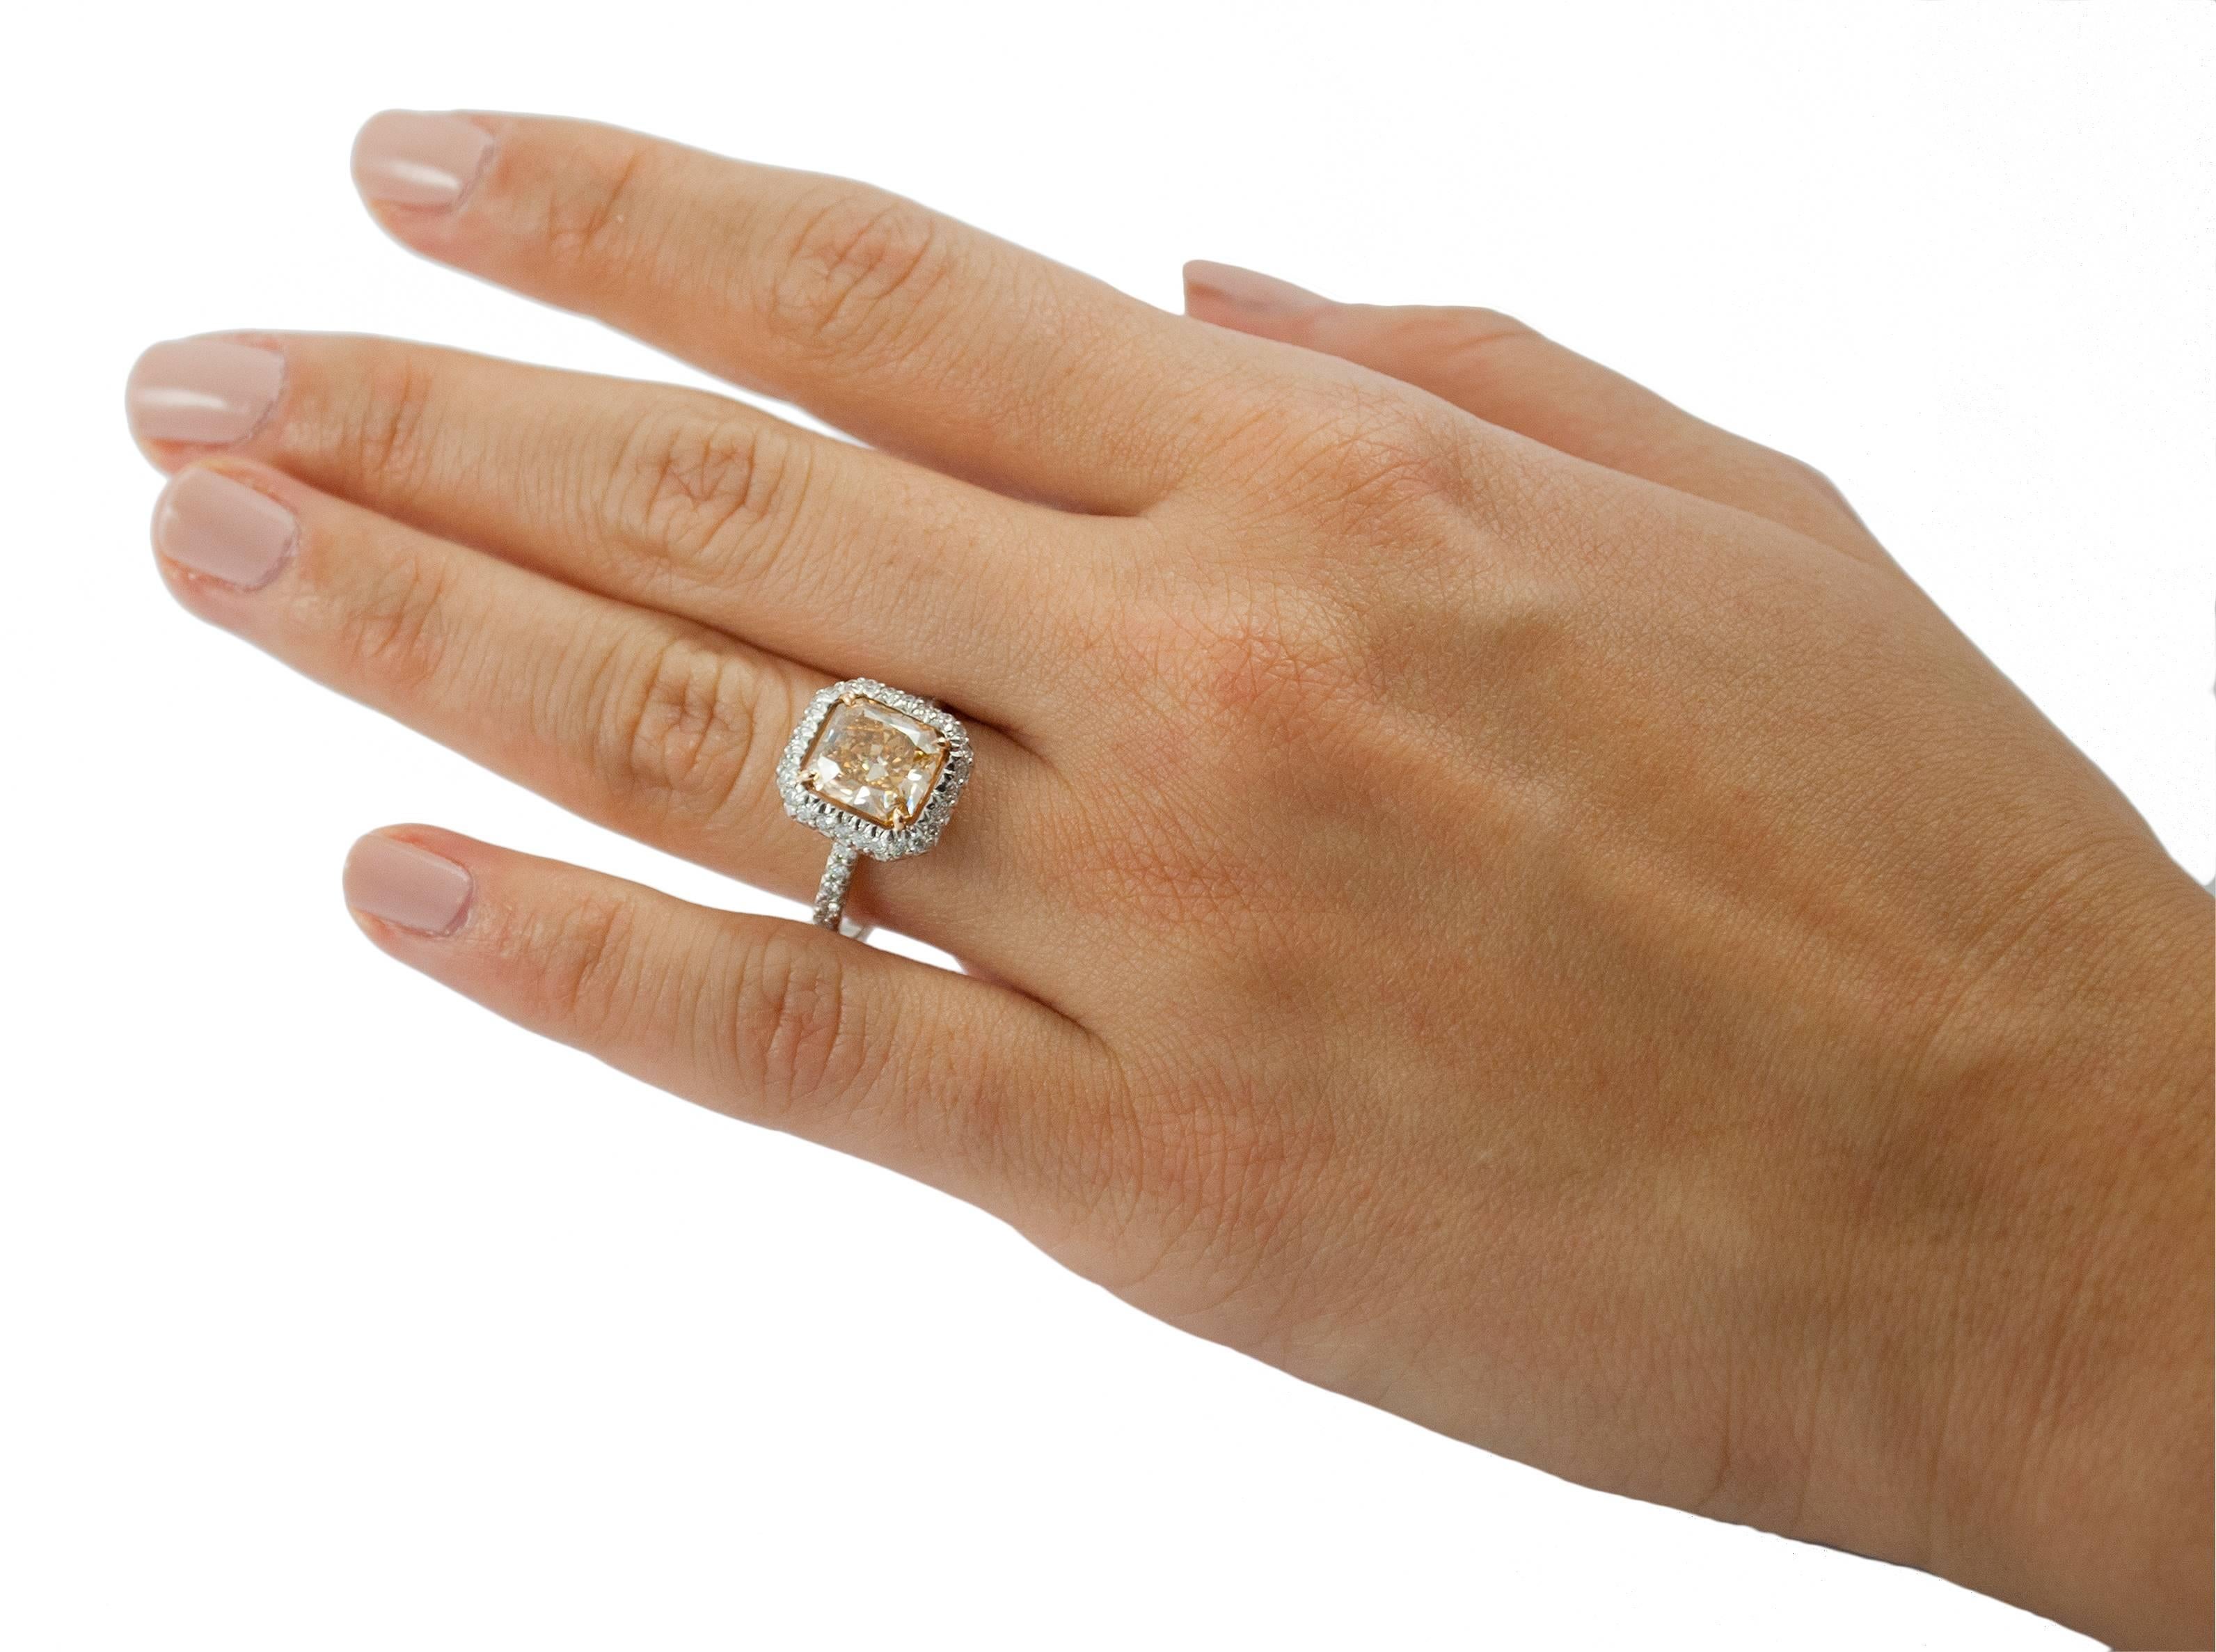 This ring features a 2.01 carat cut-cornered rectangular modified brilliant diamond, of VS2 clarity, which has received a color grade of fancy brownish orangey yellow. It is set on a platinum band with 18kt rose gold prongs. White diamonds are set